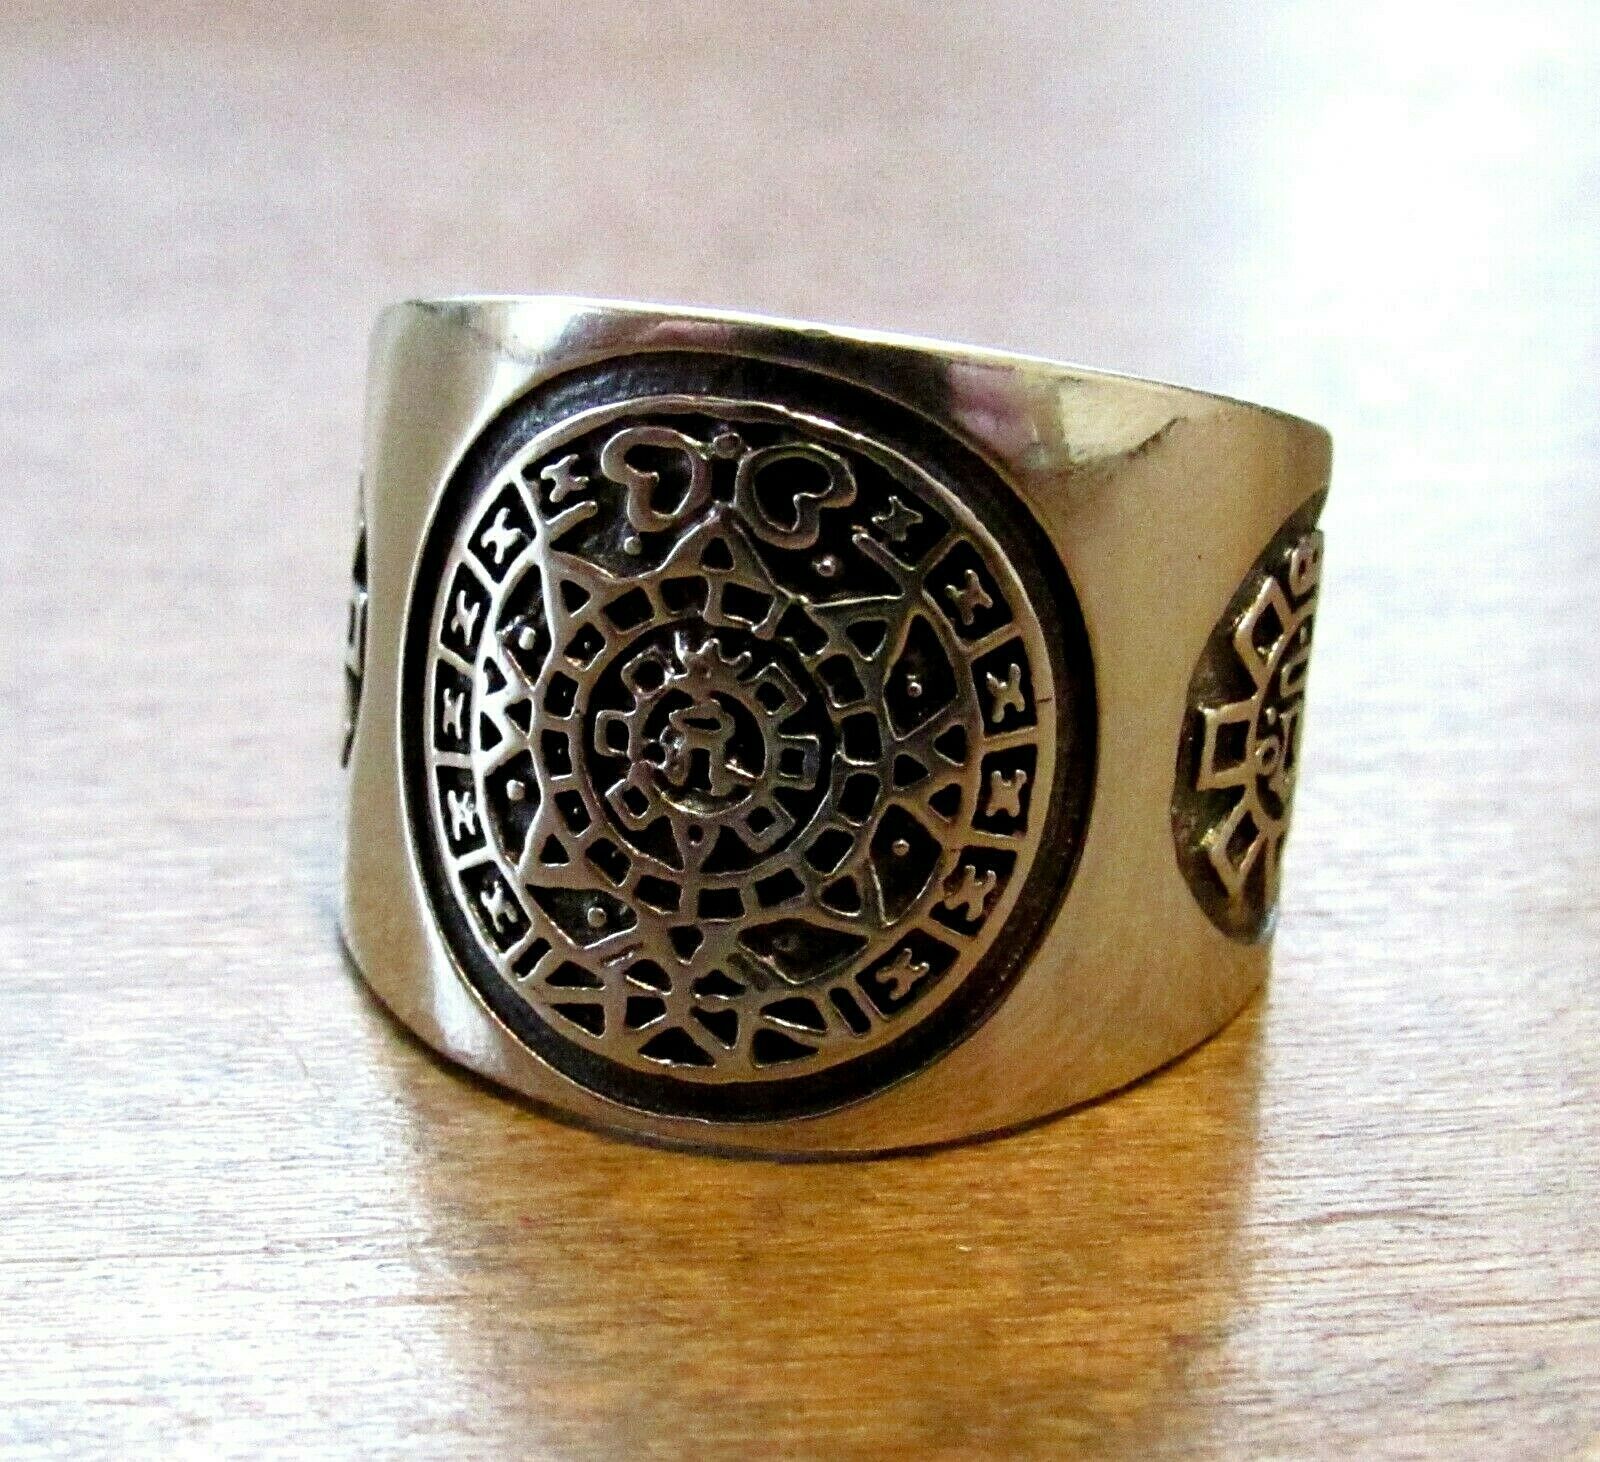 Handcrafted Solid 925 Sterling Silver Men's AZTEC / MAYAN CALENDAR Ring